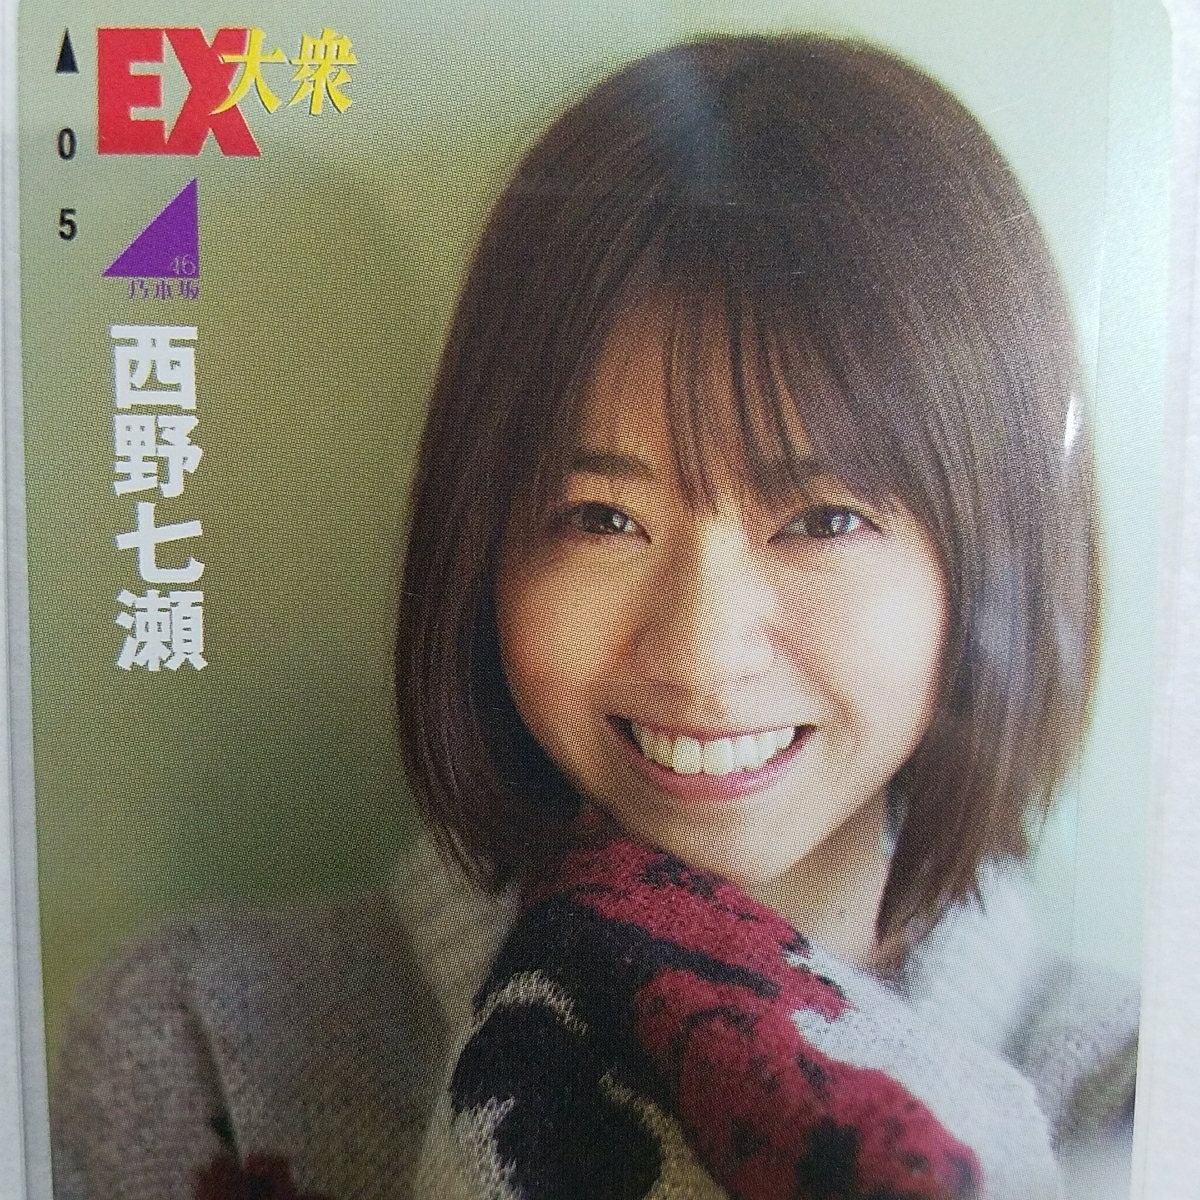  west . 7 .* QUO card * Mini letter only free shipping! Nogizaka 46*.- Chan 